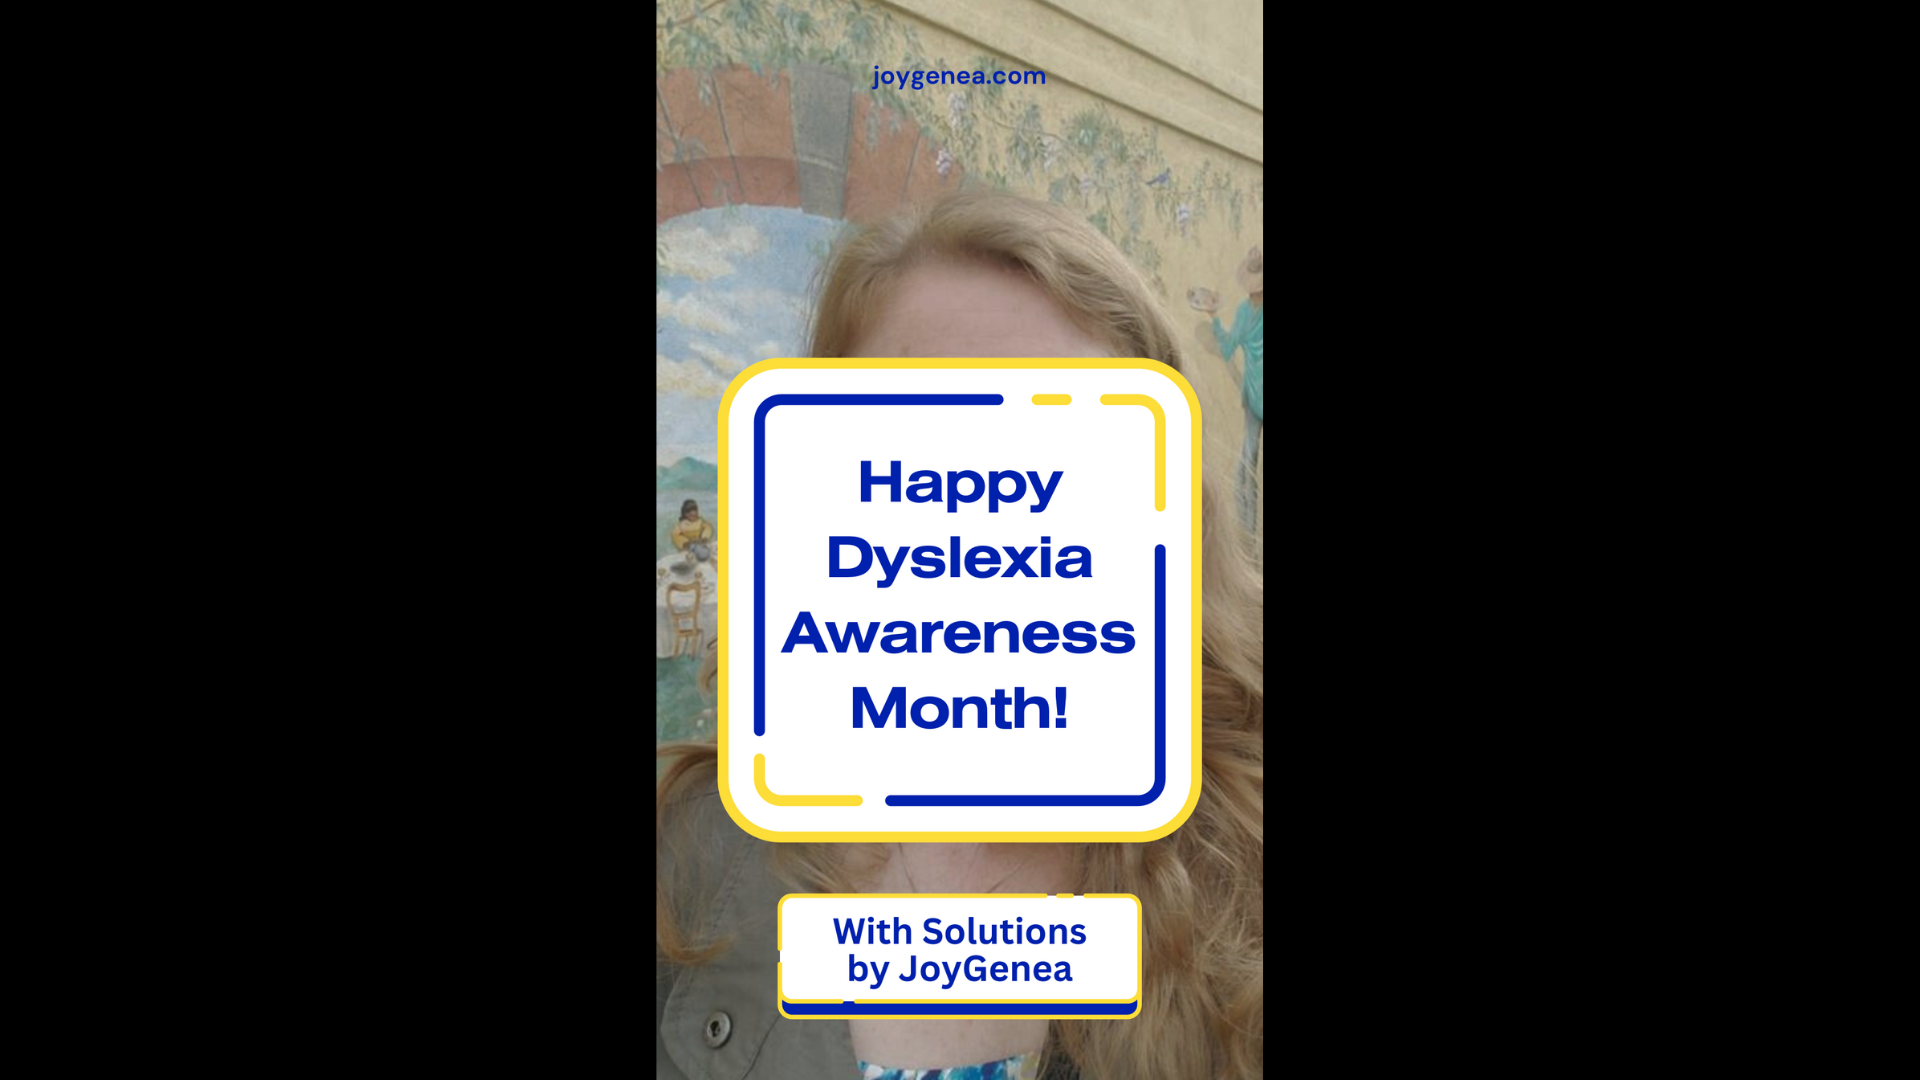 Featured image for “Happy Dyslexia Awareness Month!”